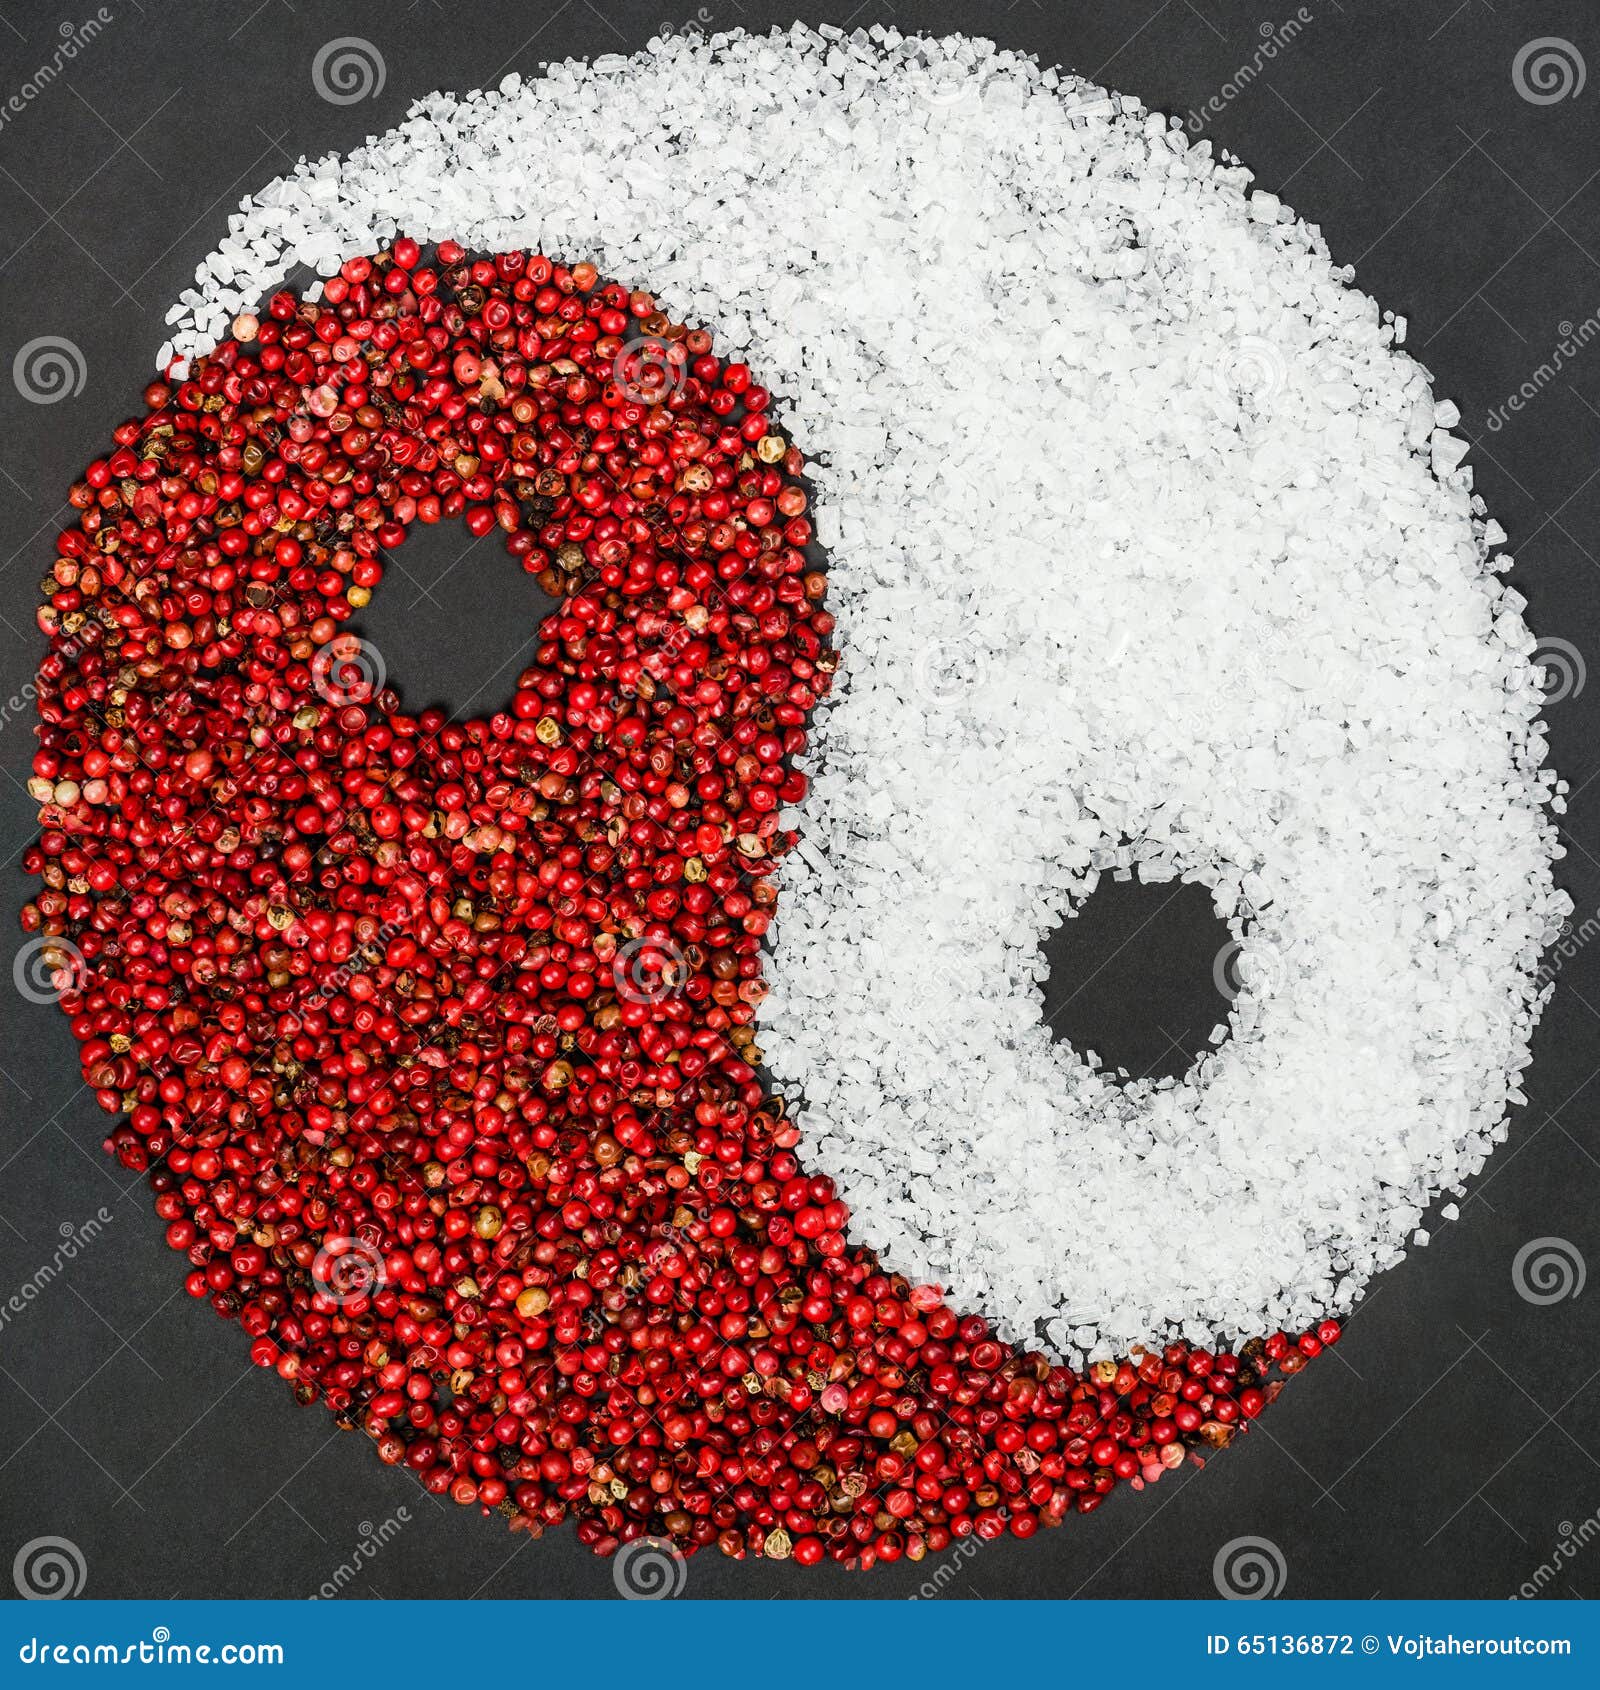 Yin Yang Symbol Made from Red Pepper and Salt Stock Photo - Image